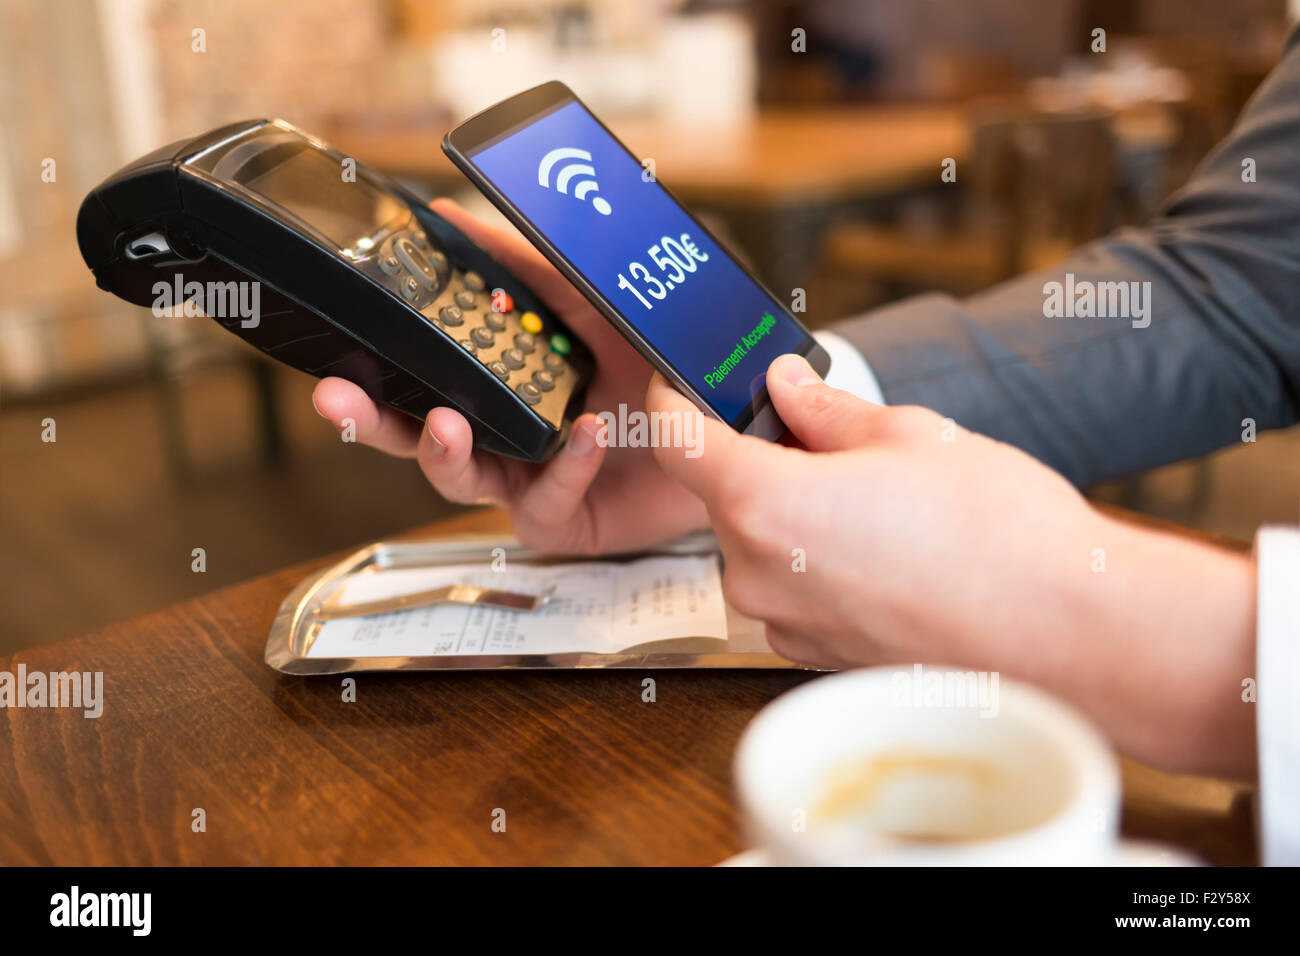 Man paying with NFC technology on mobile phone, in restaurant, bar, cafe. Euro French version Stock Photo